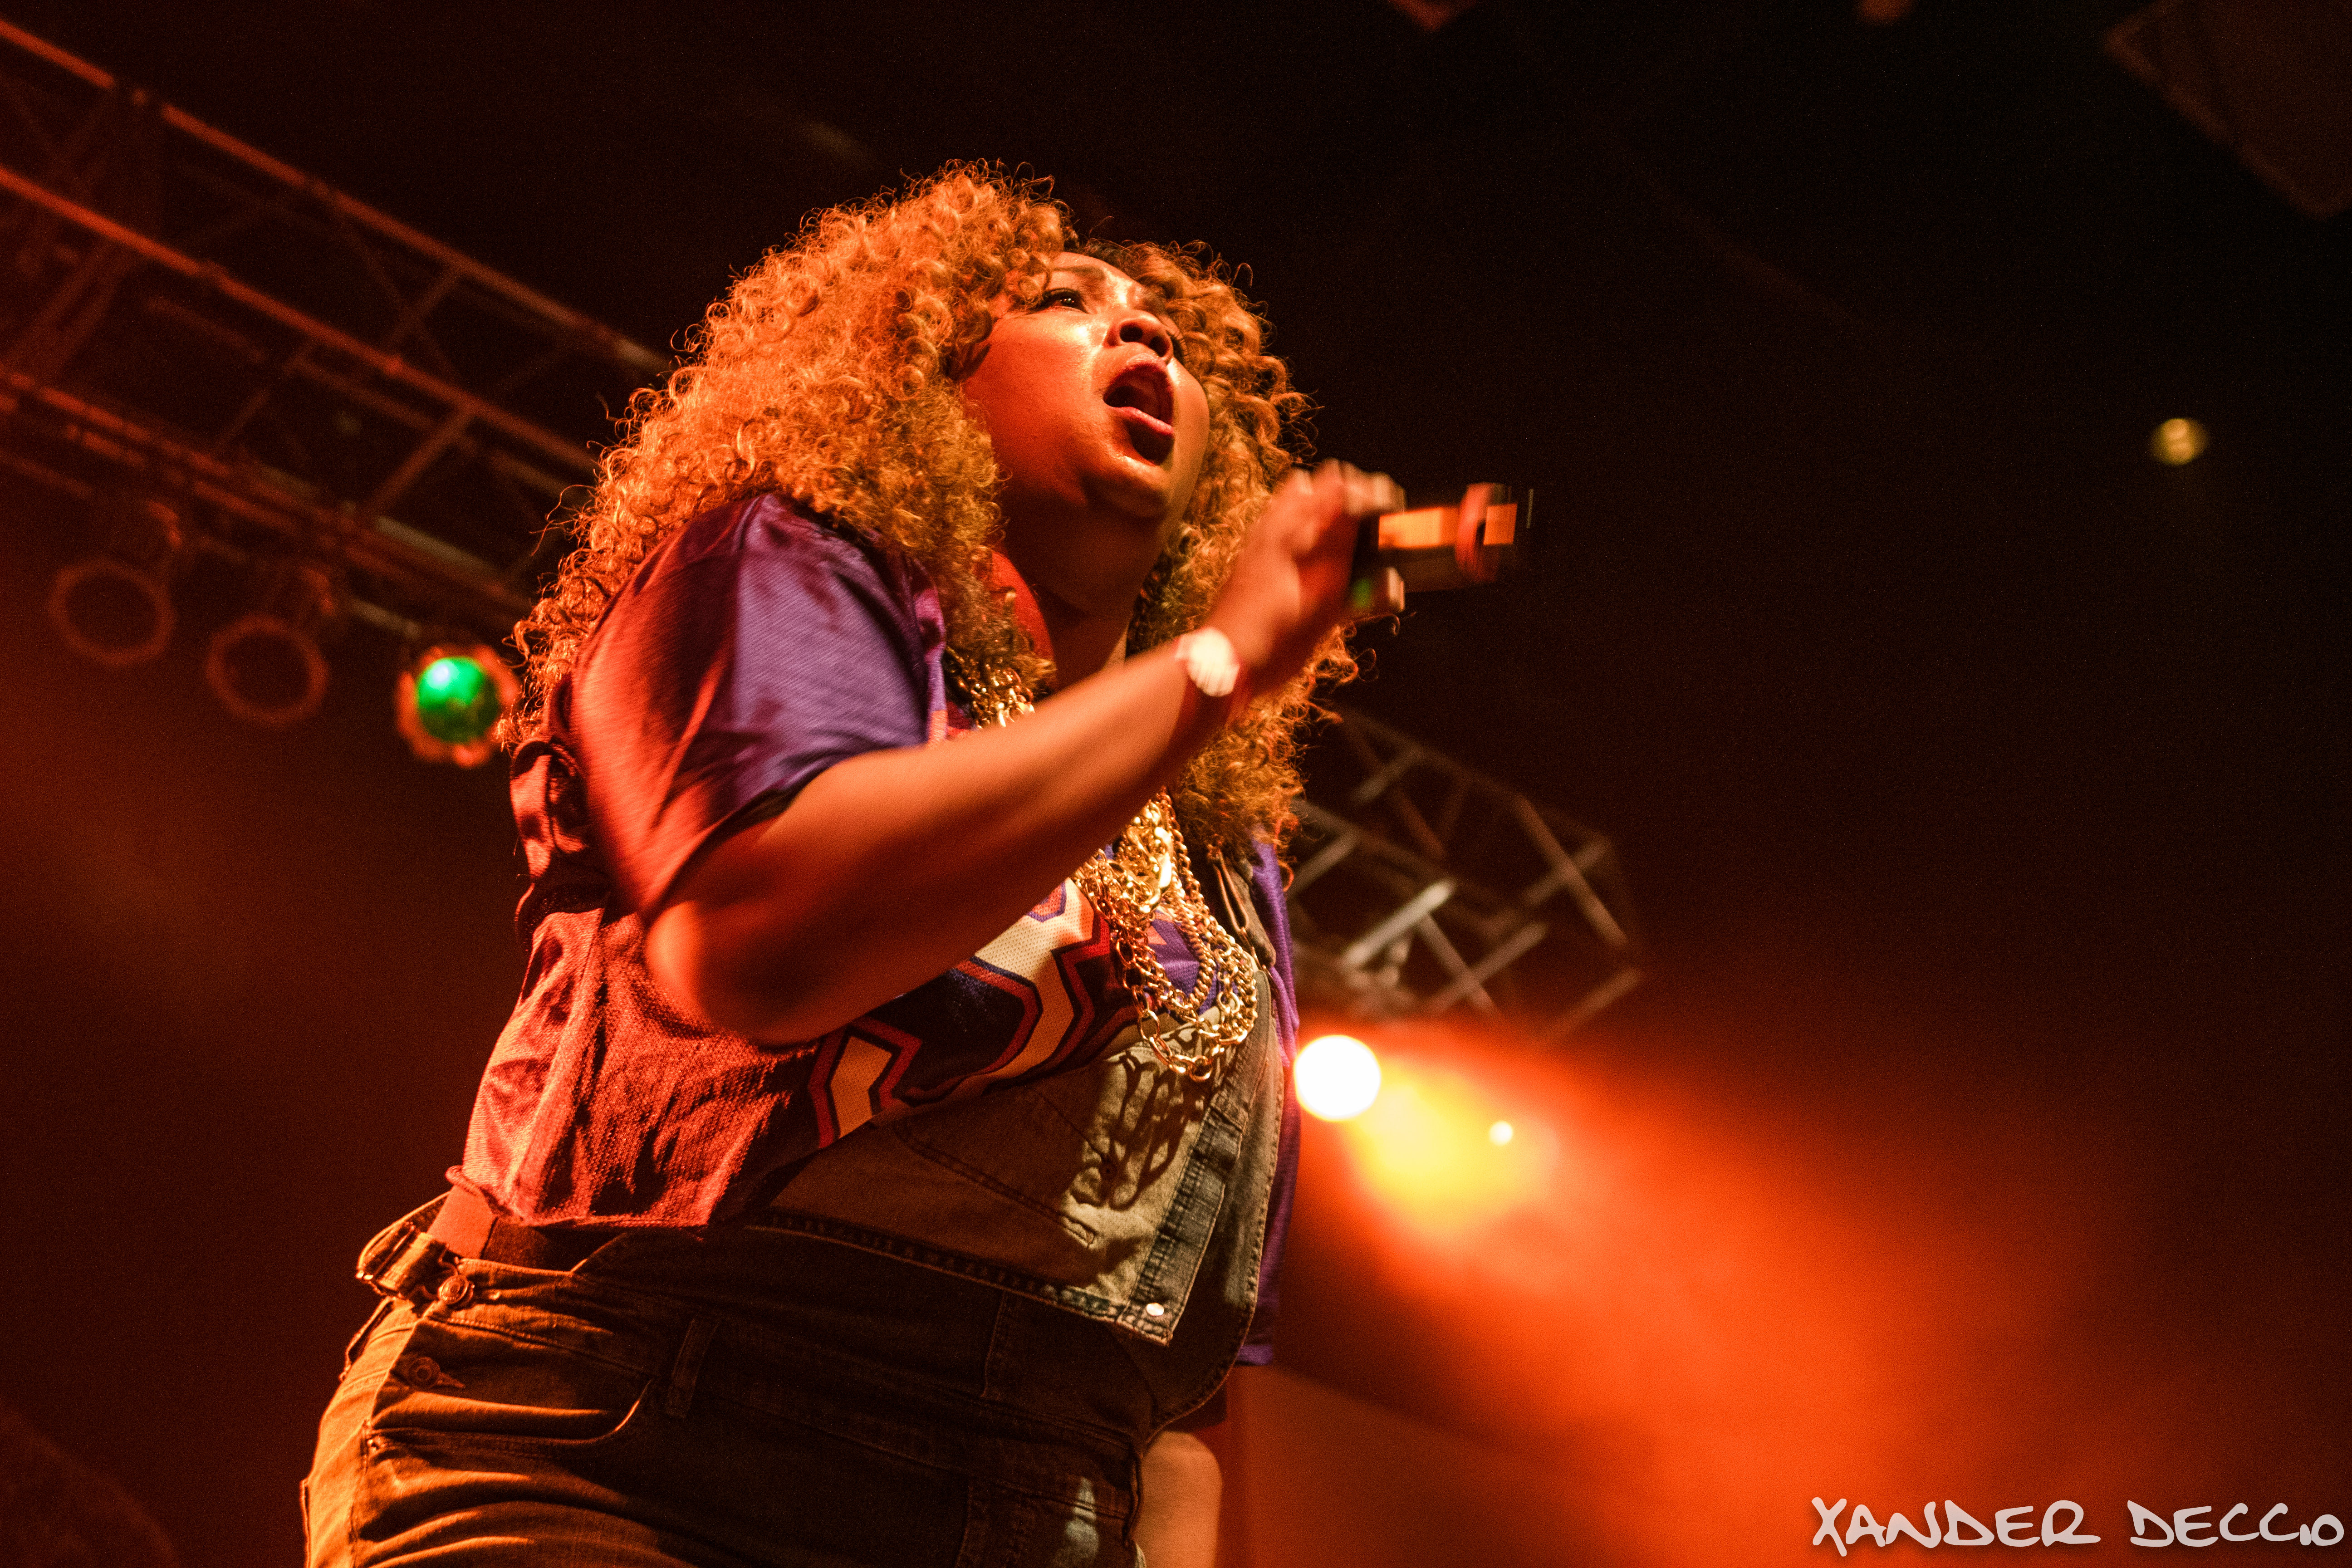 Lizzo @ The Knitting Factory (Photo By Xander Deccio)